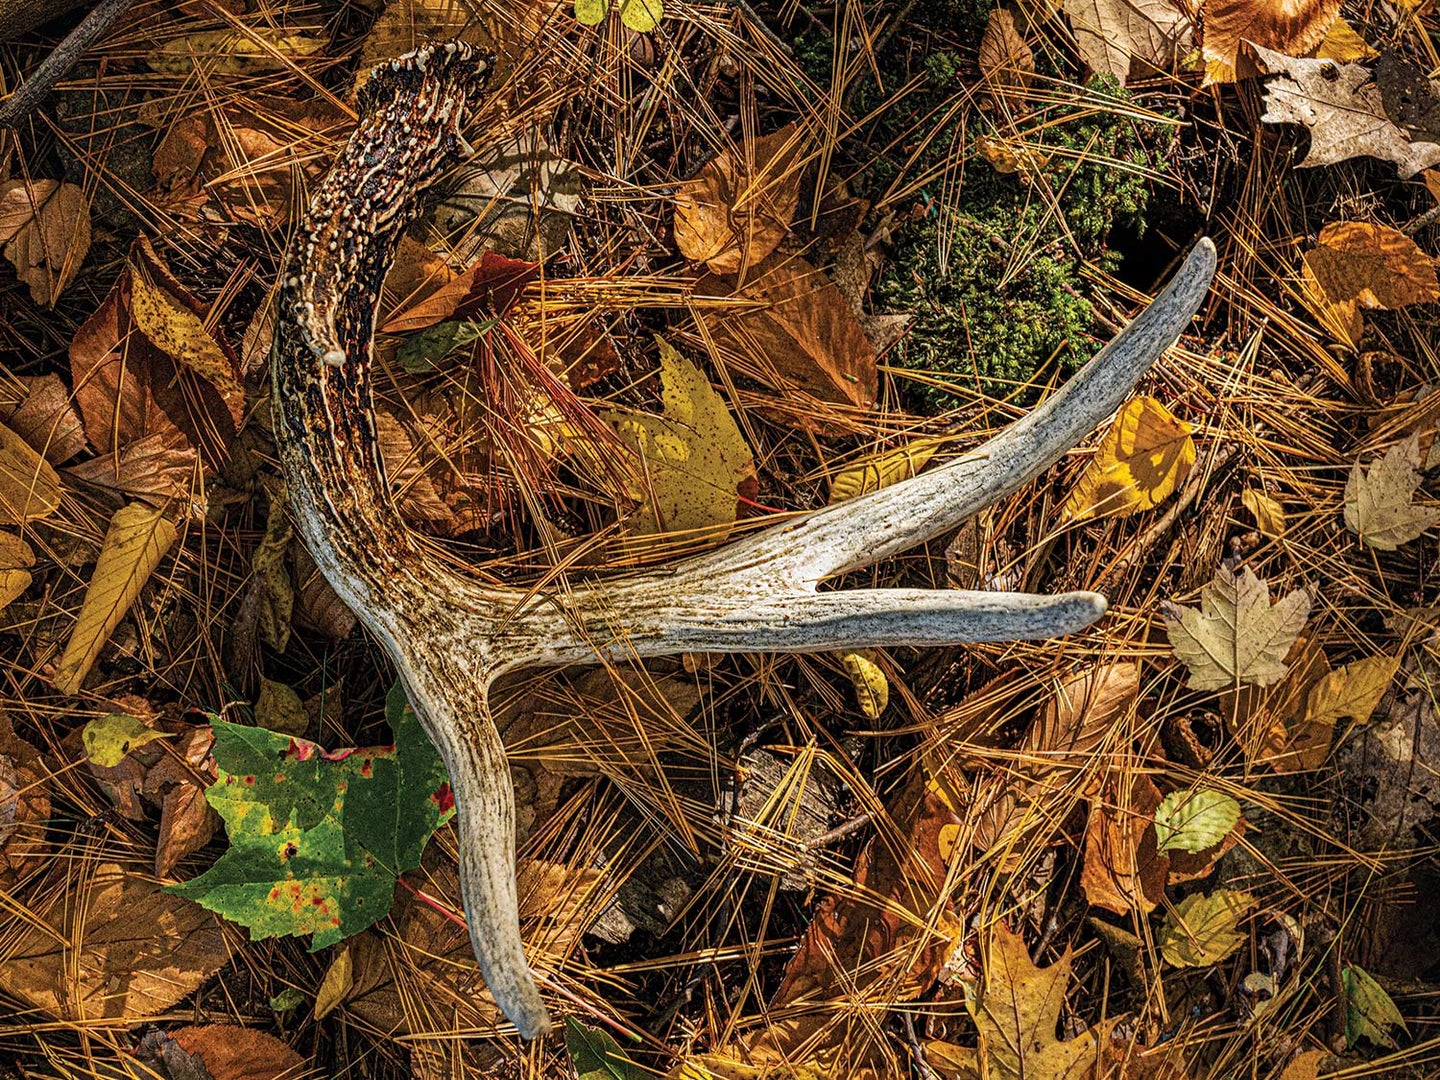 A shed deer antler lying in leaves and pines.